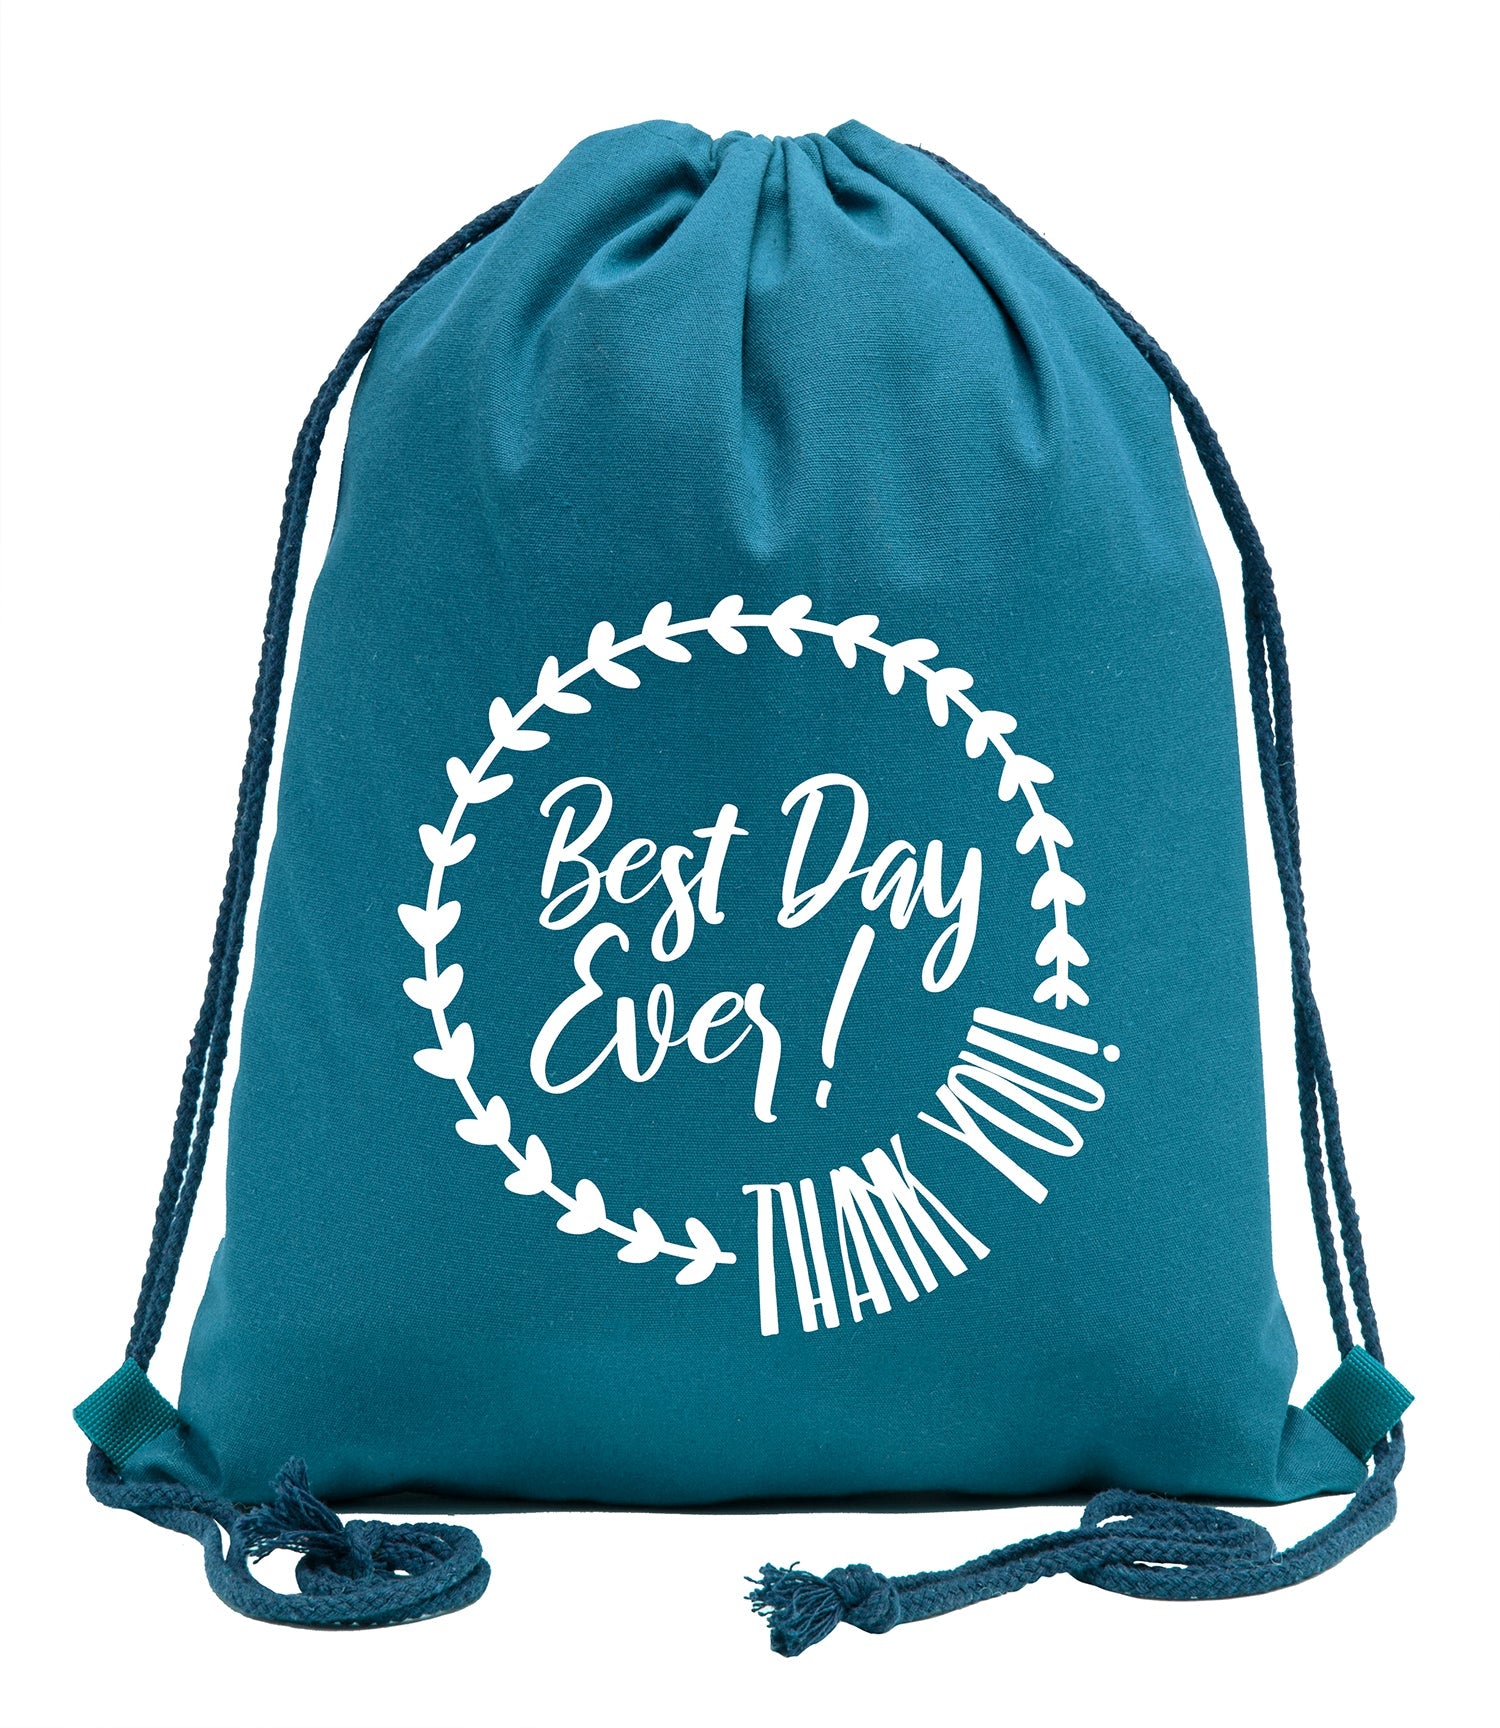 Best Day Ever! Thank You! Cotton Drawstring Bag - Mato & Hash